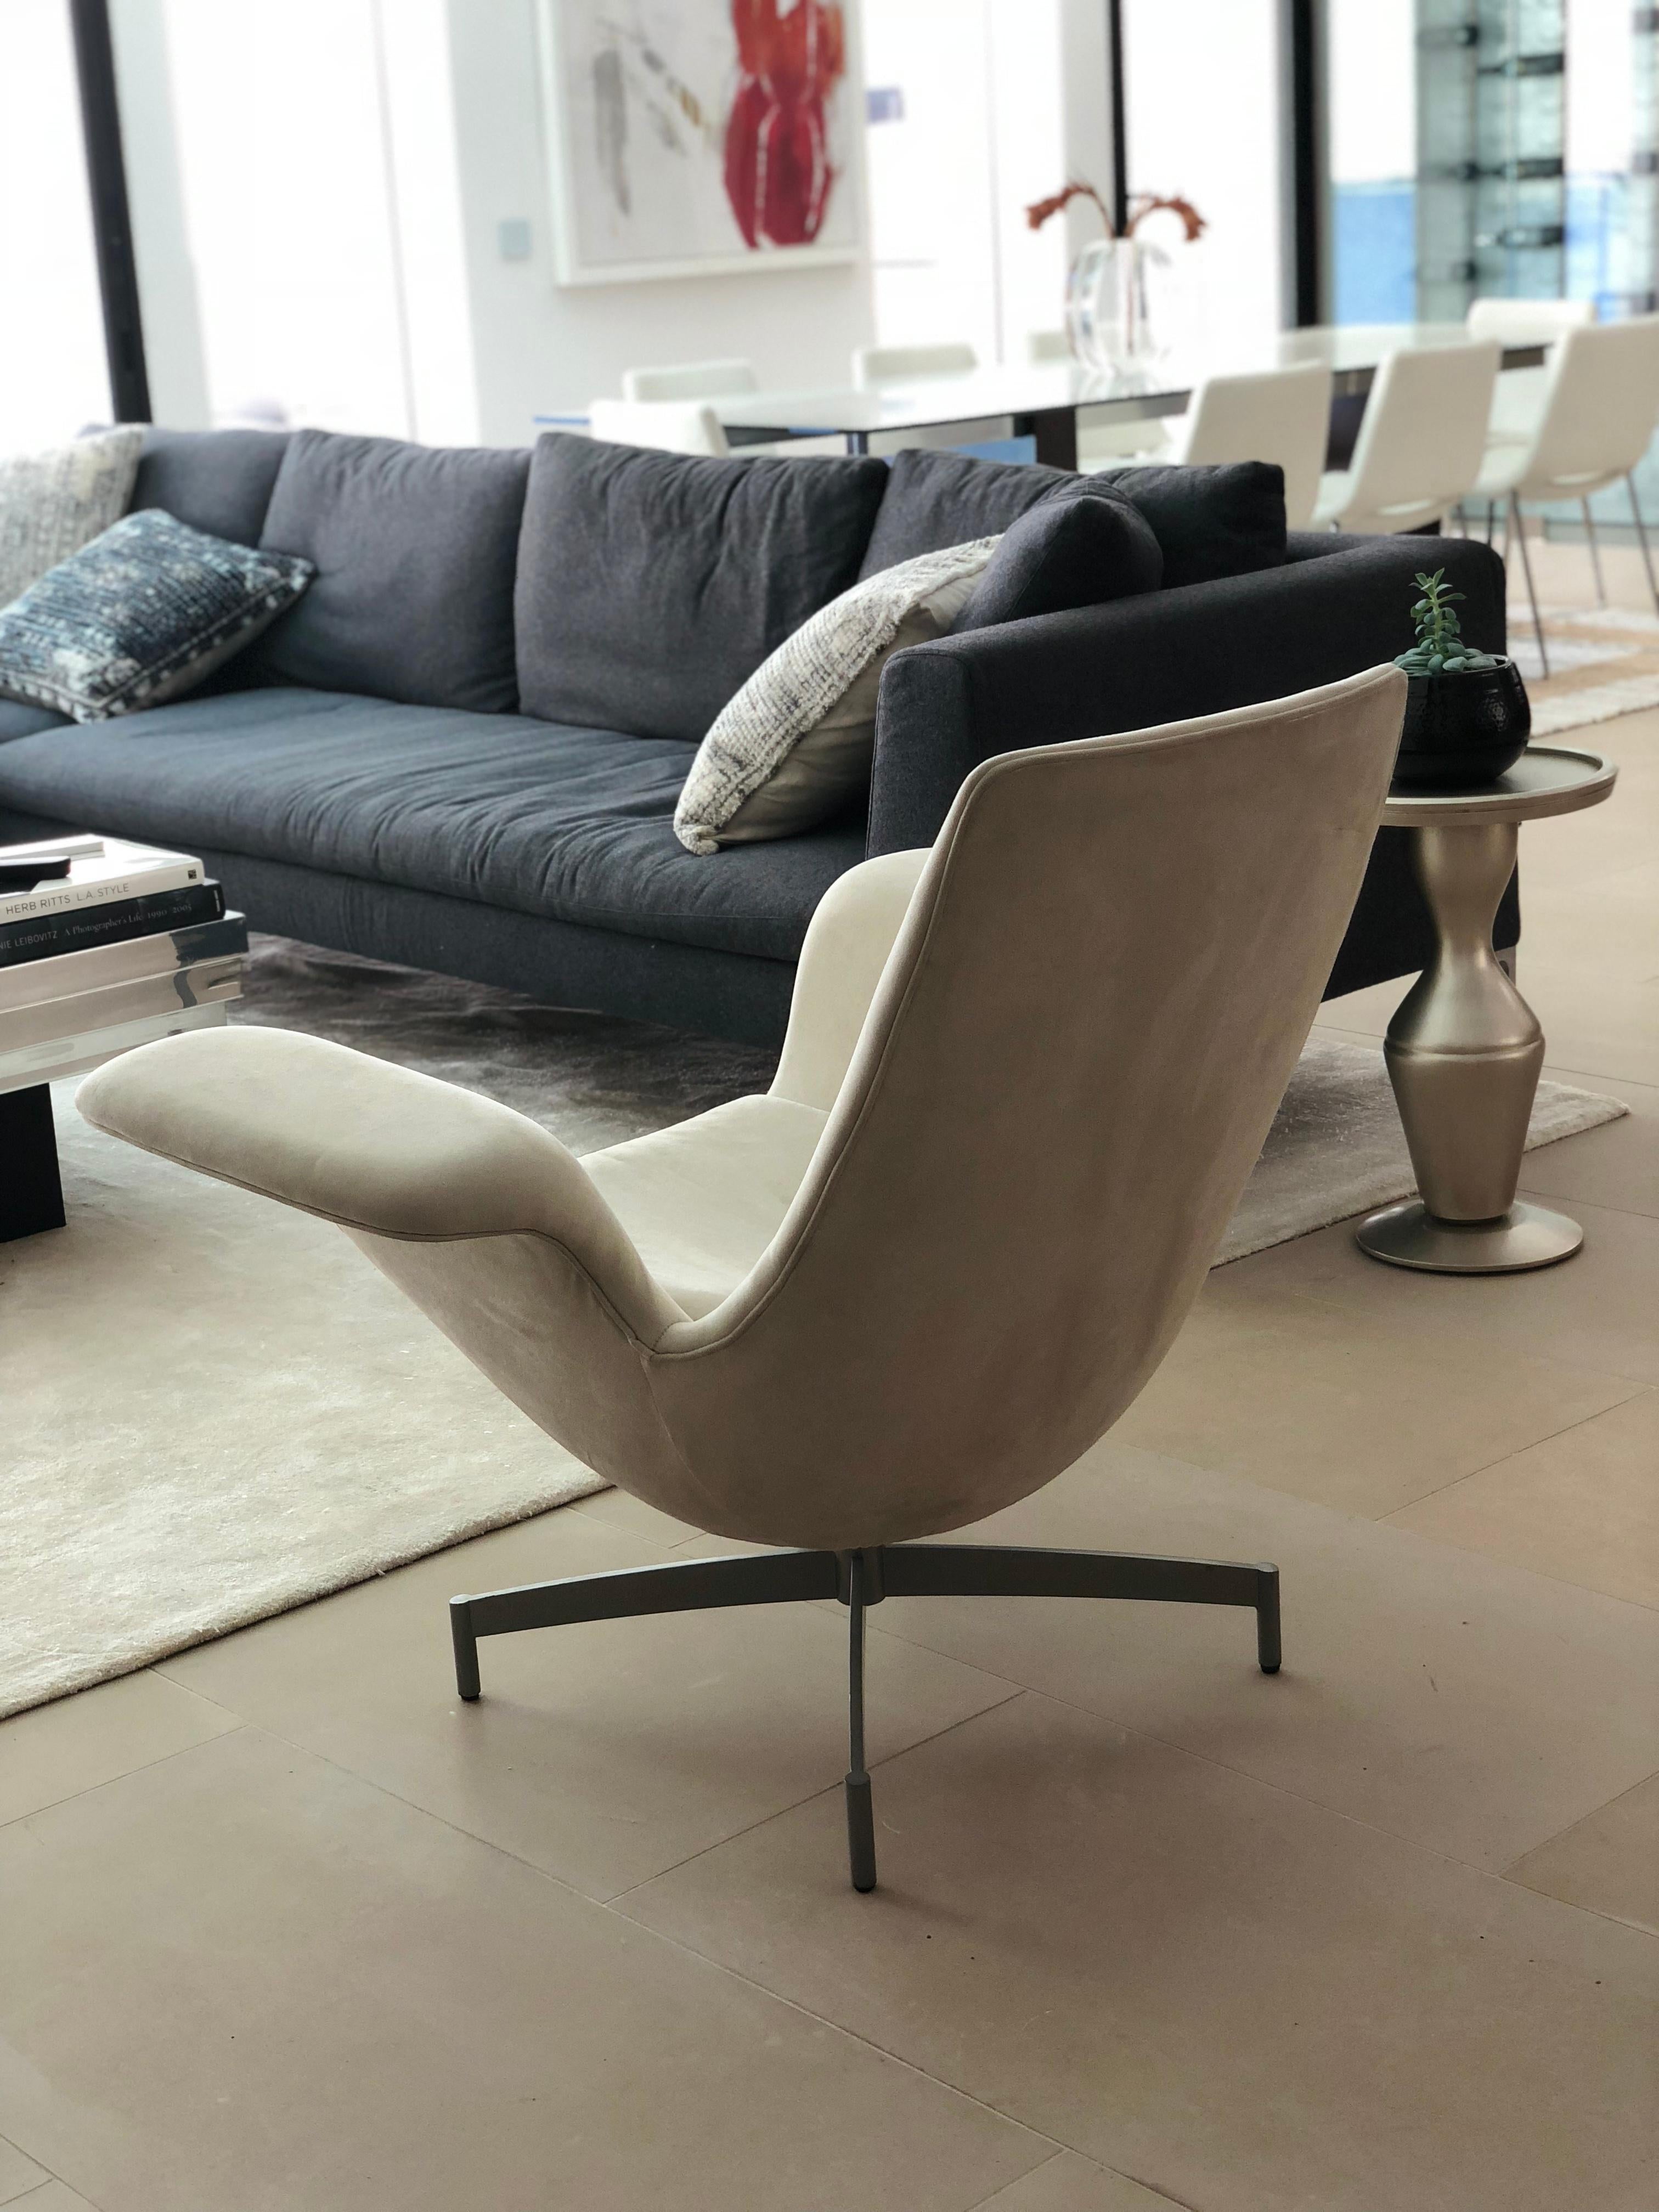 Inspired by the Classic design aesthetic of the mid-20th century, the dialogue chair provides an intuitive and purposeful solution for casual conference and lobby scenarios. Simple yet functional, the lounge chair features an integral task surface